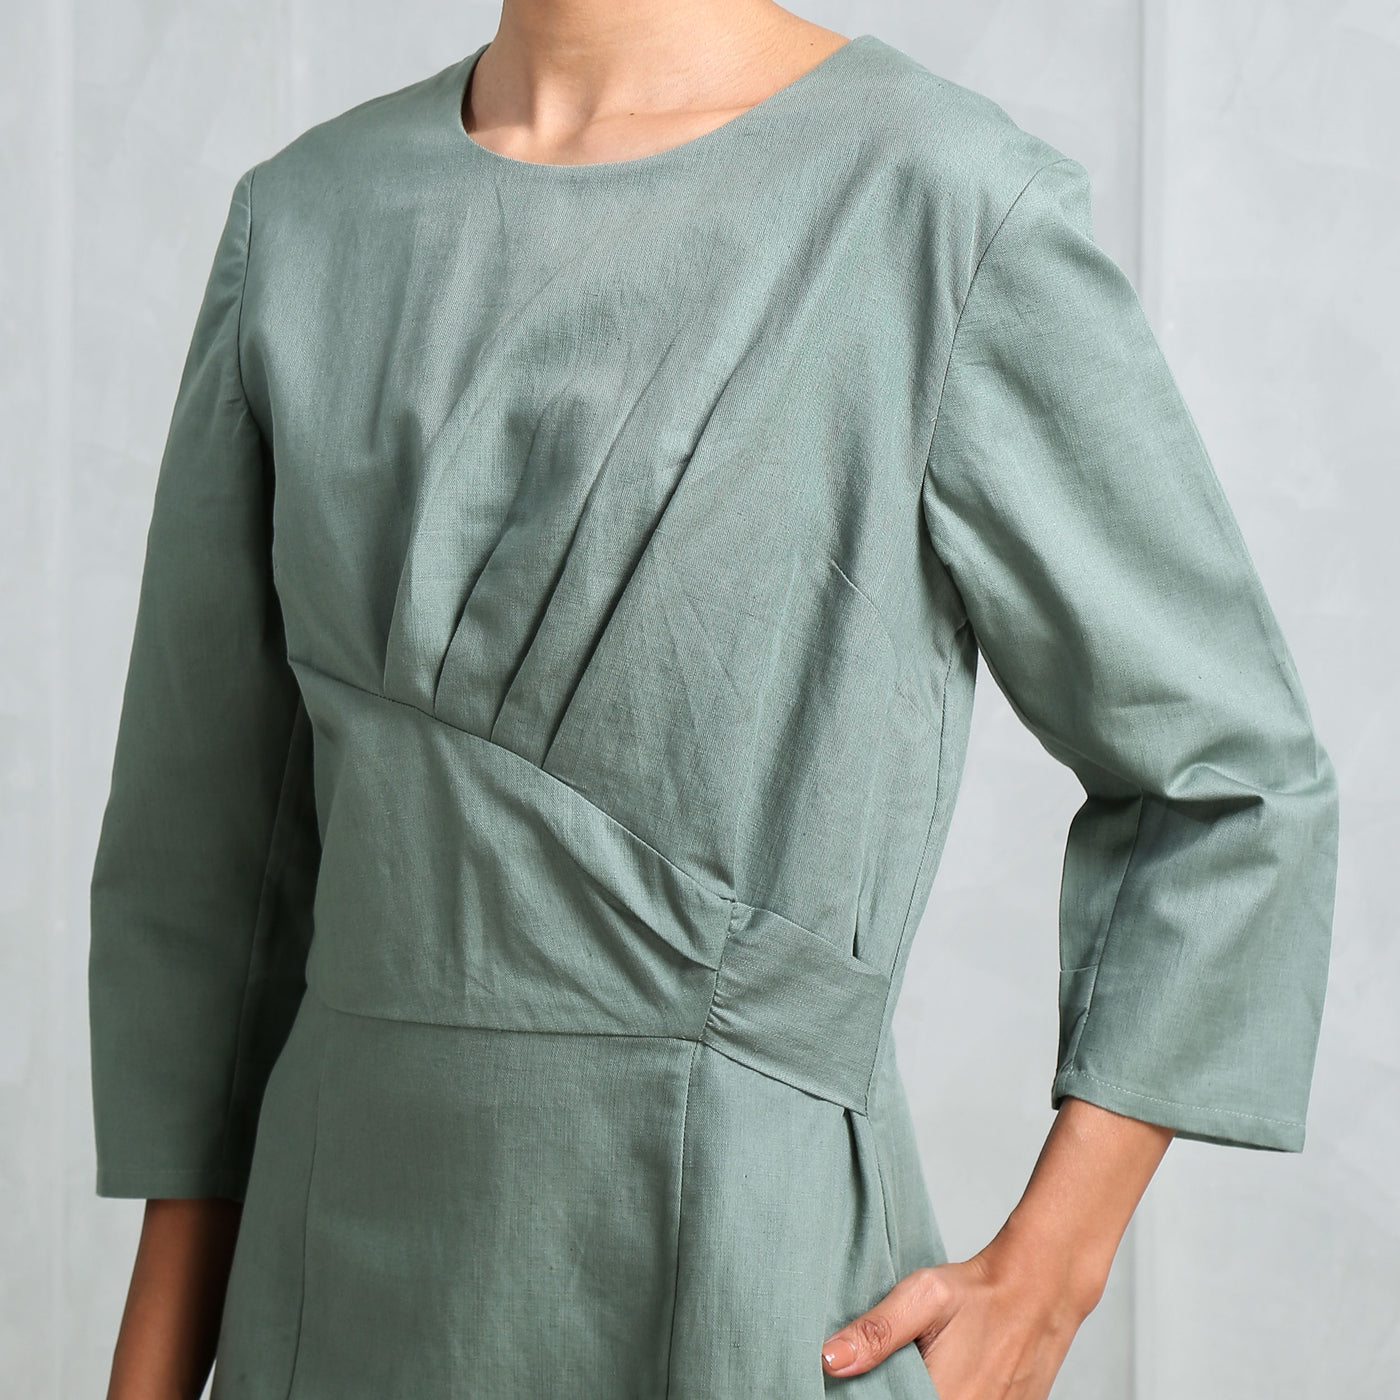 Sunset Shift Dress from bhaane in green